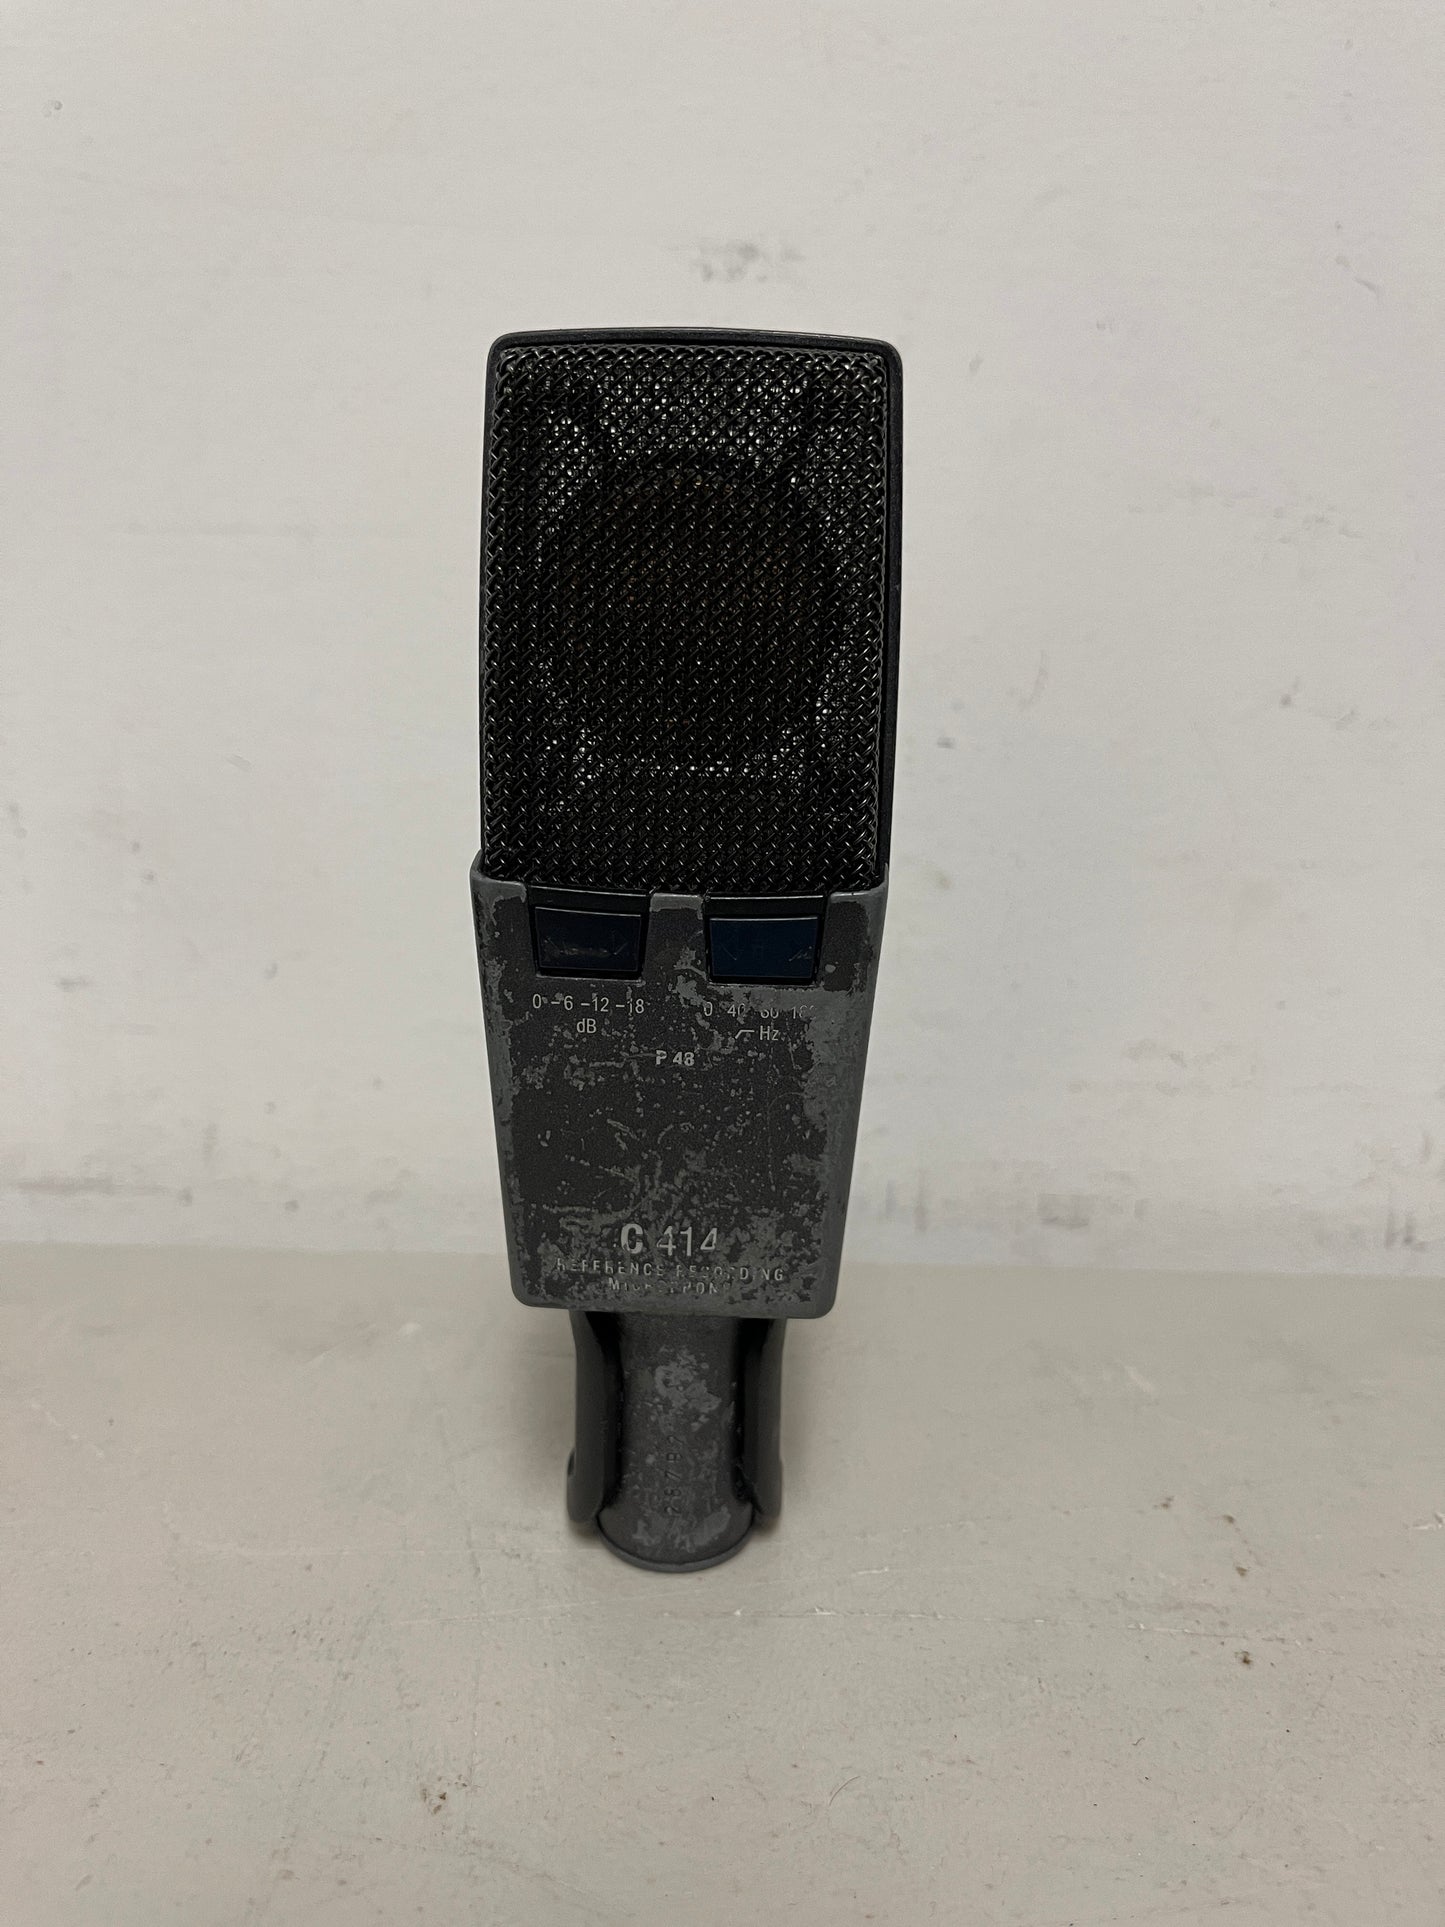 Used AKG C-414/XLII Large-Diaphragm, 4 Pattern, Studio Condenser Microphone for Sale. We Sell Professional Audio Equipment. Audio Systems, Amplifiers, Consoles, Mixers, Electronics, Entertainment, Sound, Live.